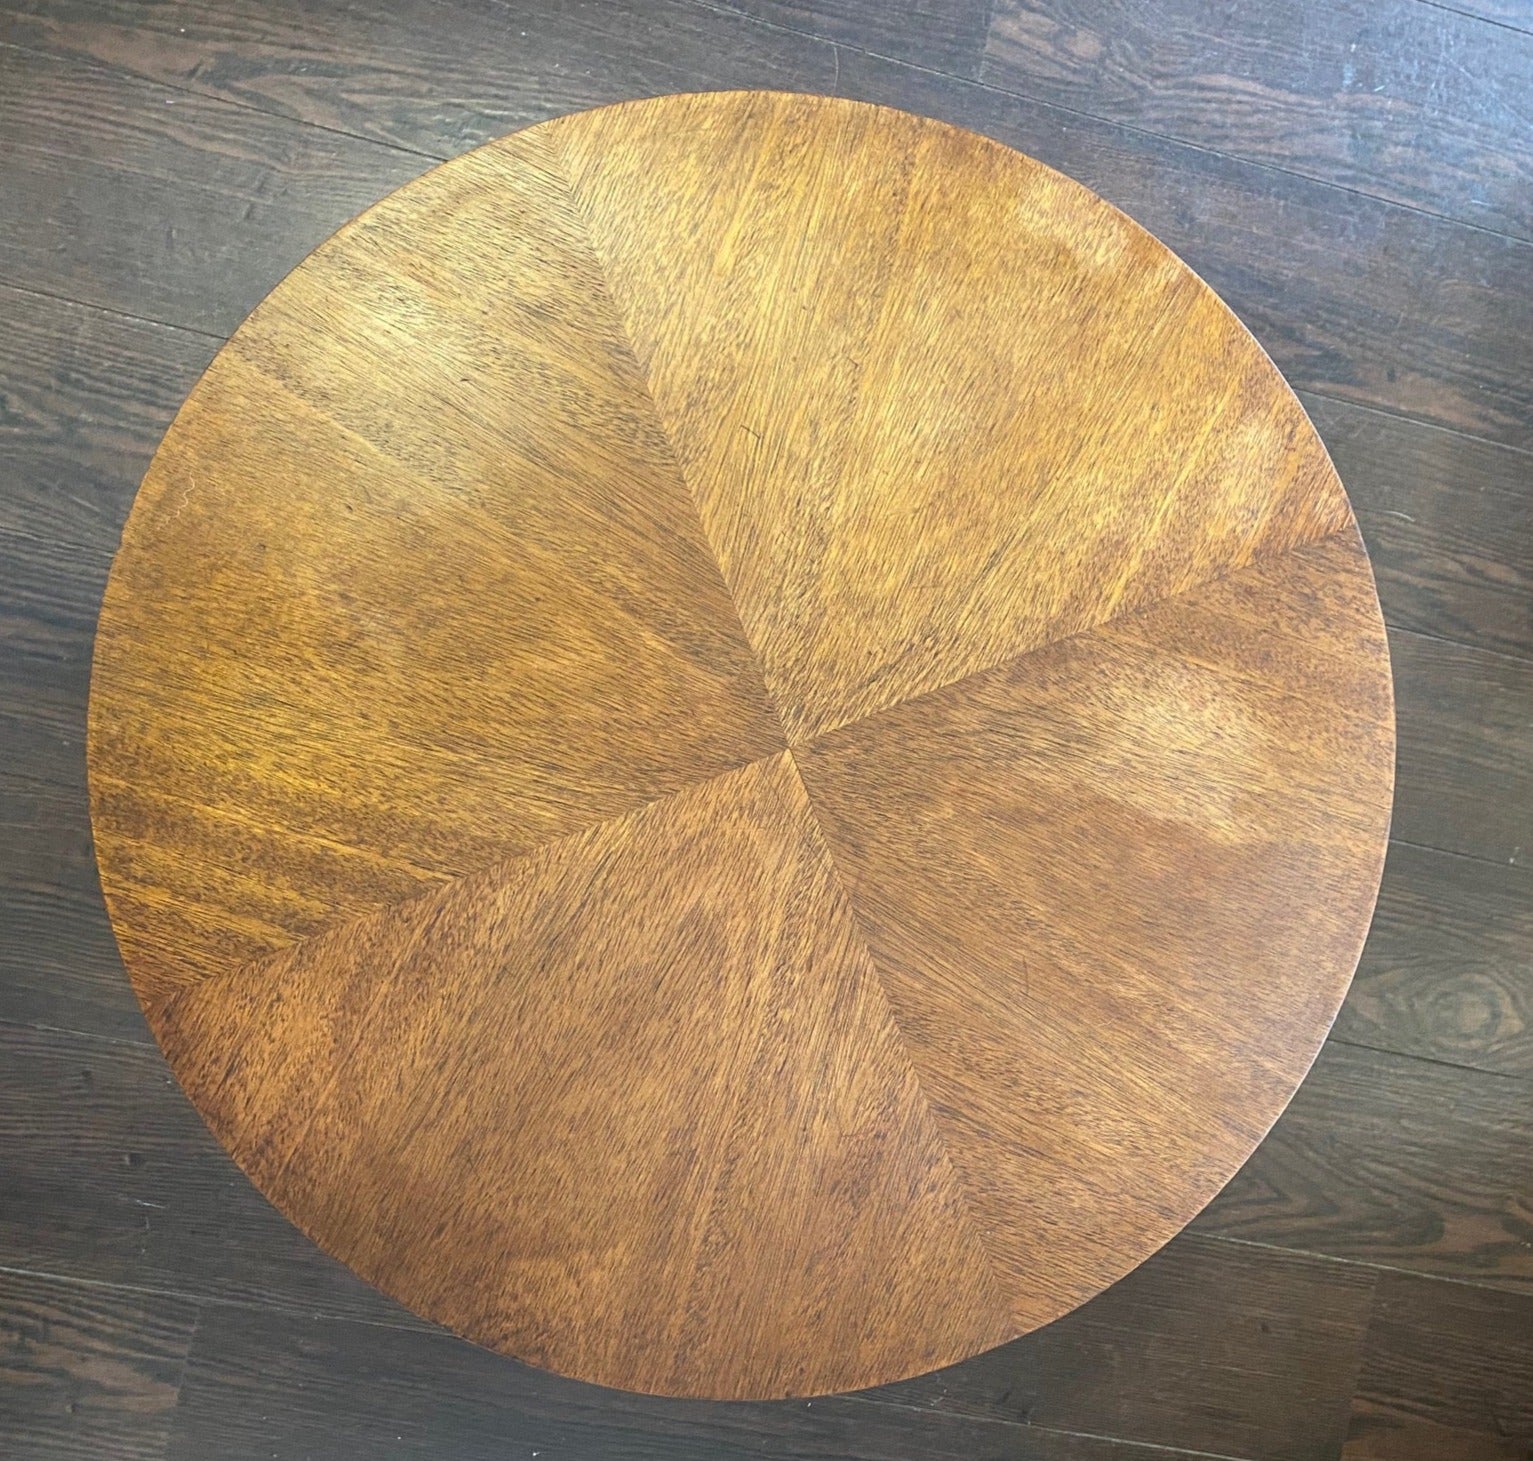 Top view of wood grain on Round Mahogany Butler's Table with Cabinet- Cook Street Vintage